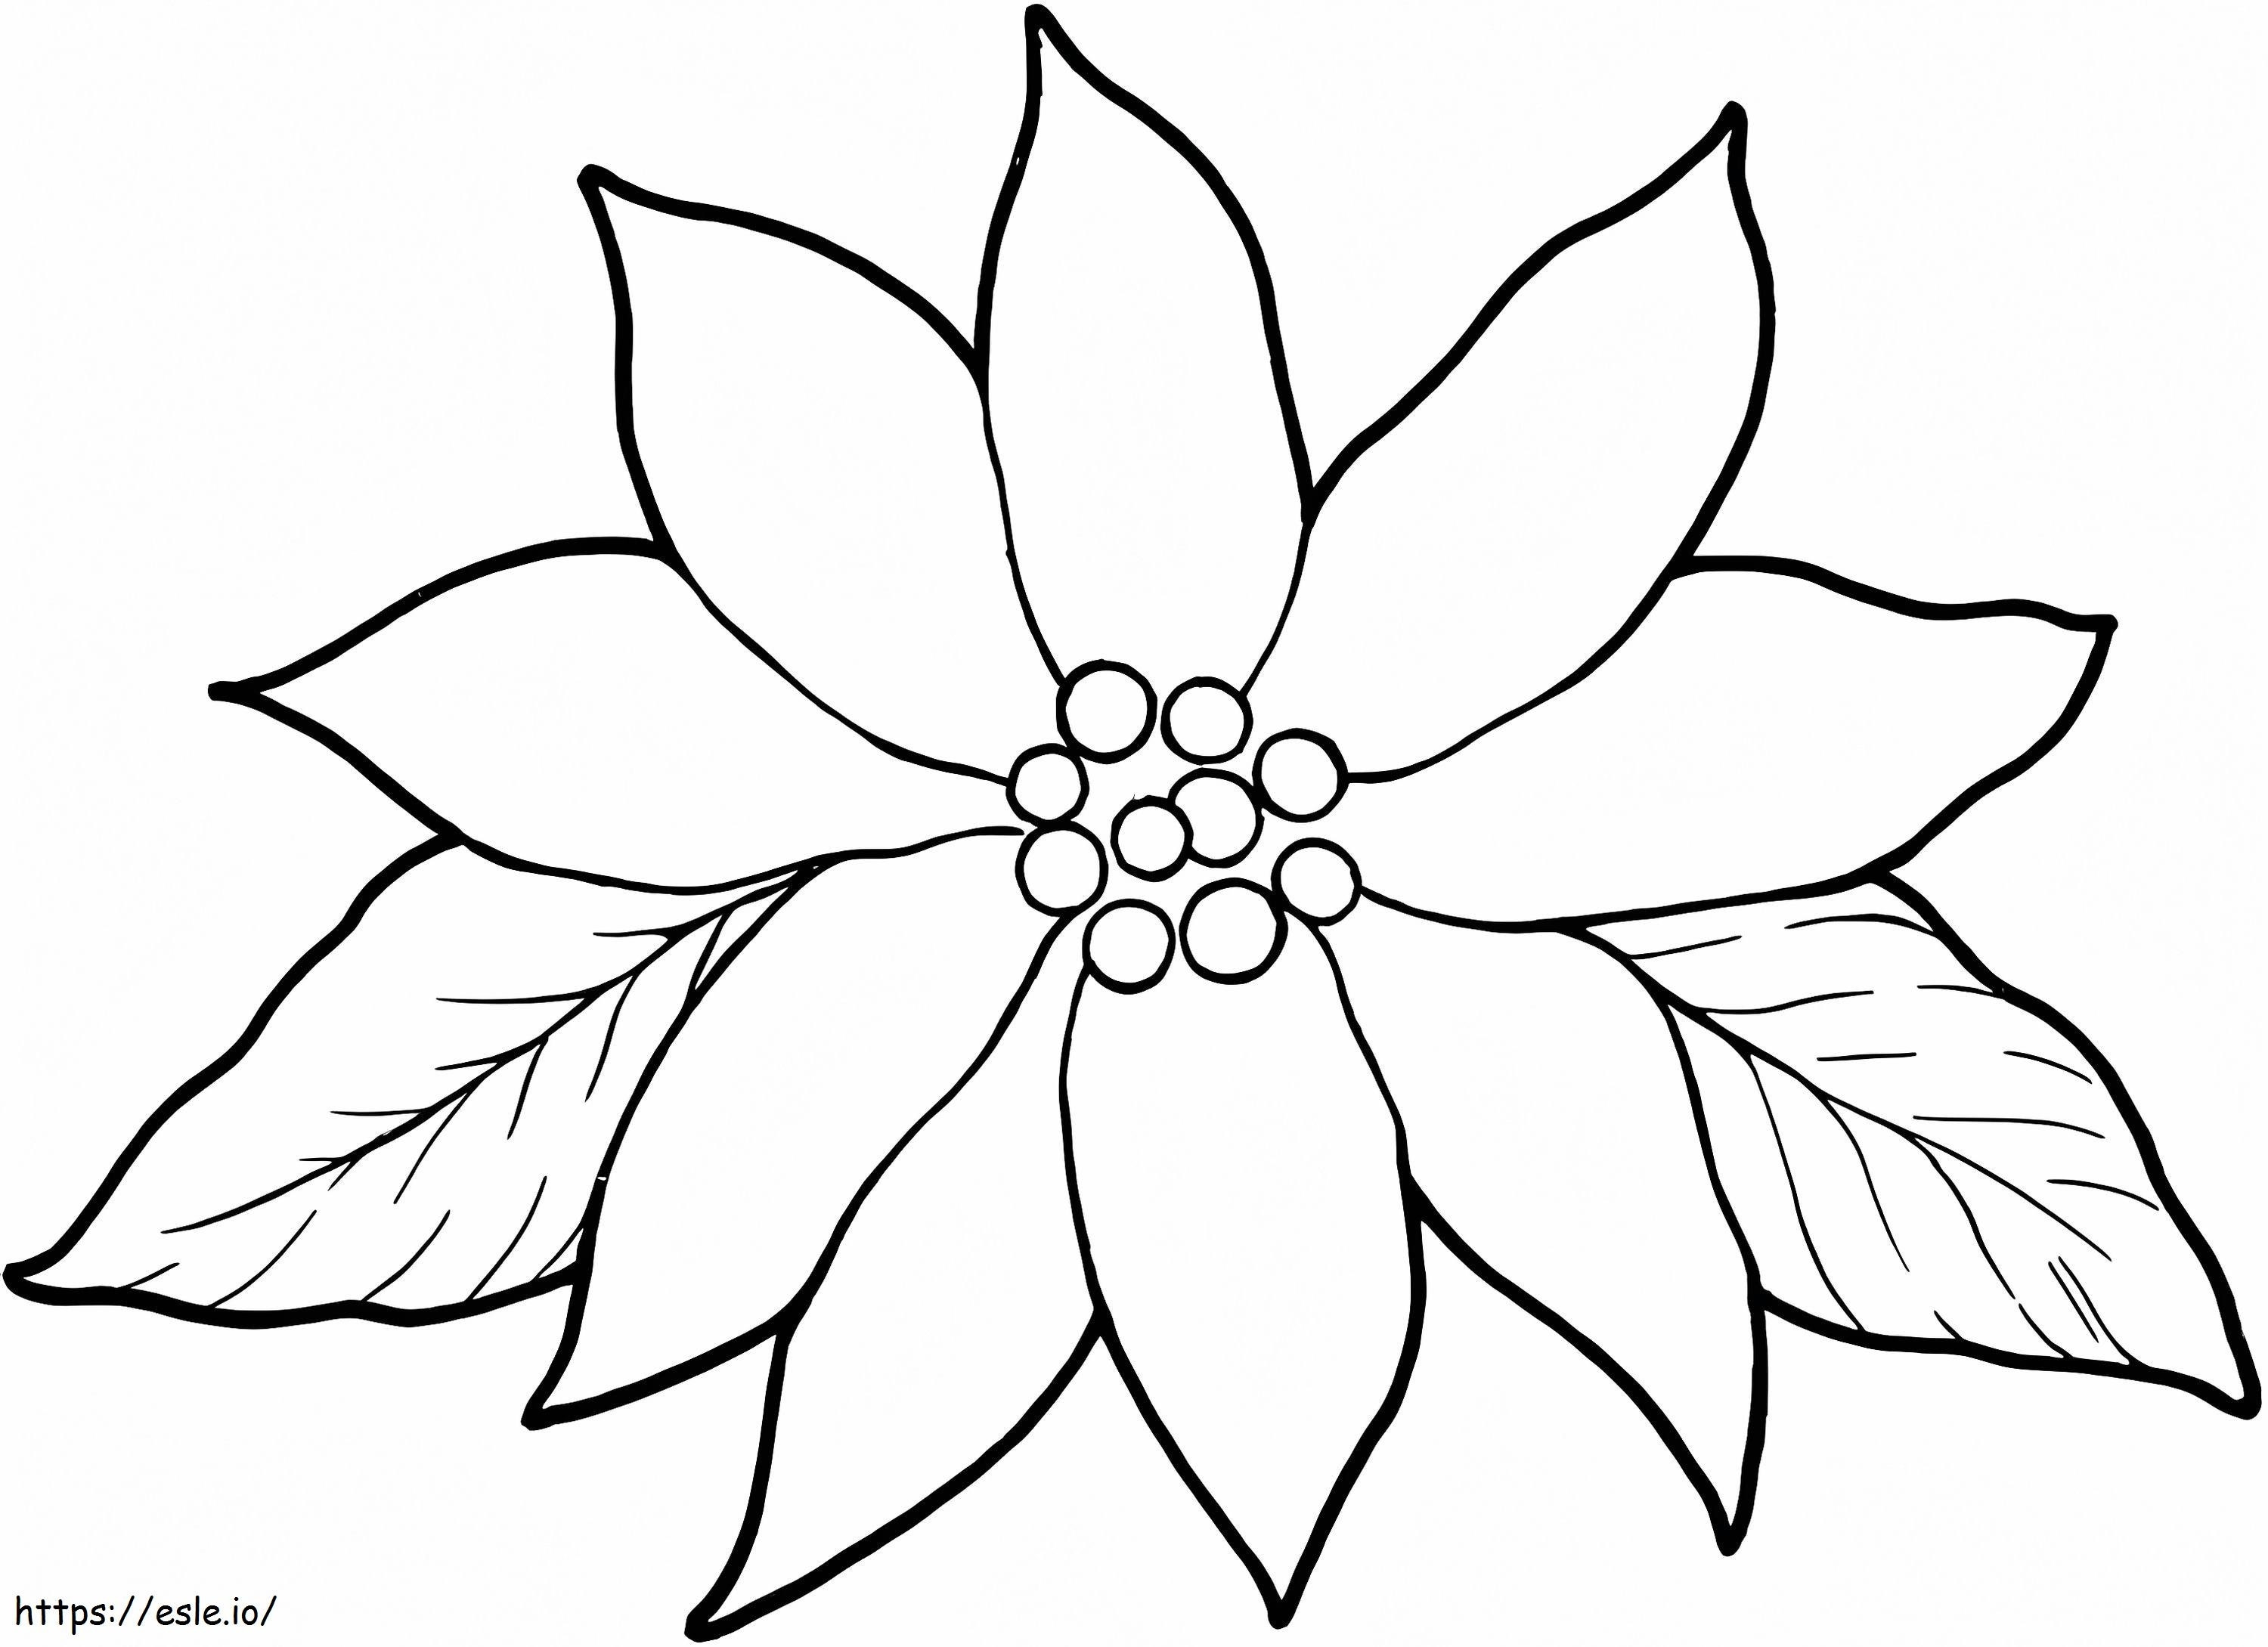 Basic Poinsettia coloring page